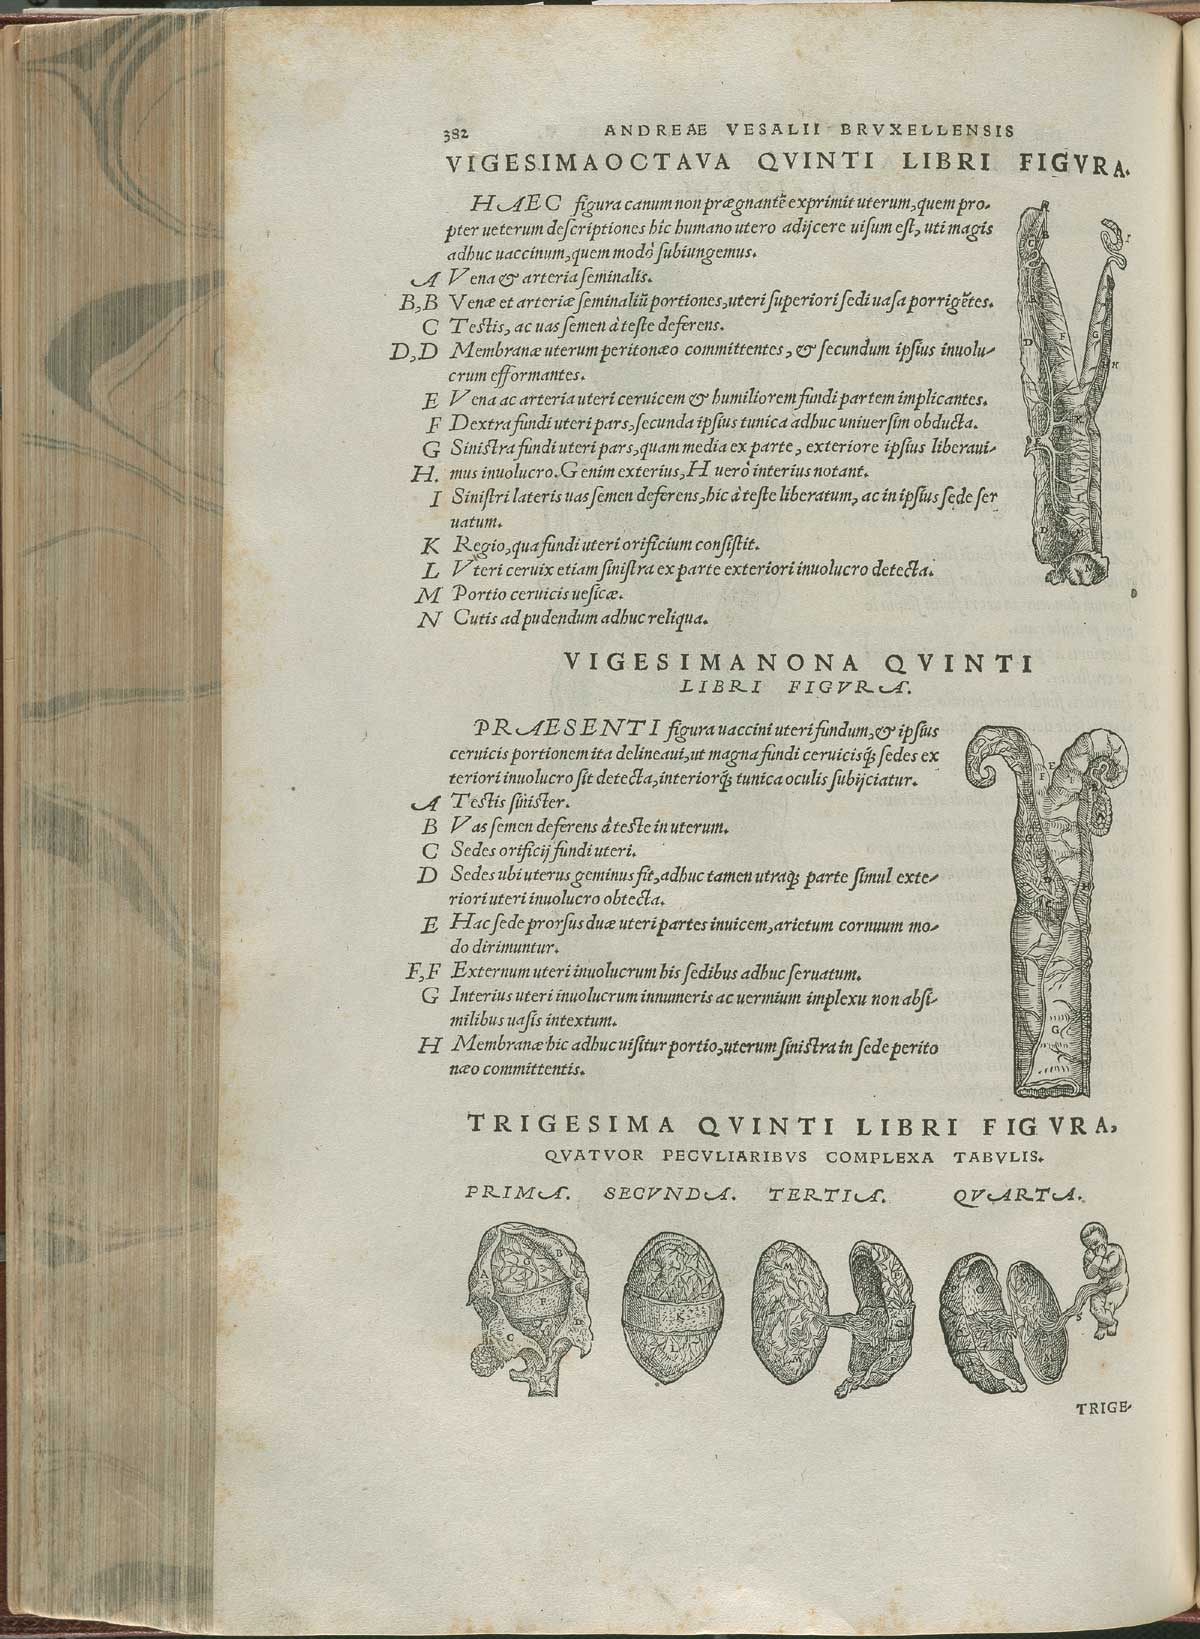 Page 382 of Andreas Vesalius' De corporis humani fabrica libri septem, featuring the illustrated woodcut of the bifid uterus of a dog and a cow on the right side of the page. At the bottom of the page are four illustrations of the placenta during gestation with a human fetus in the illustration at the right.